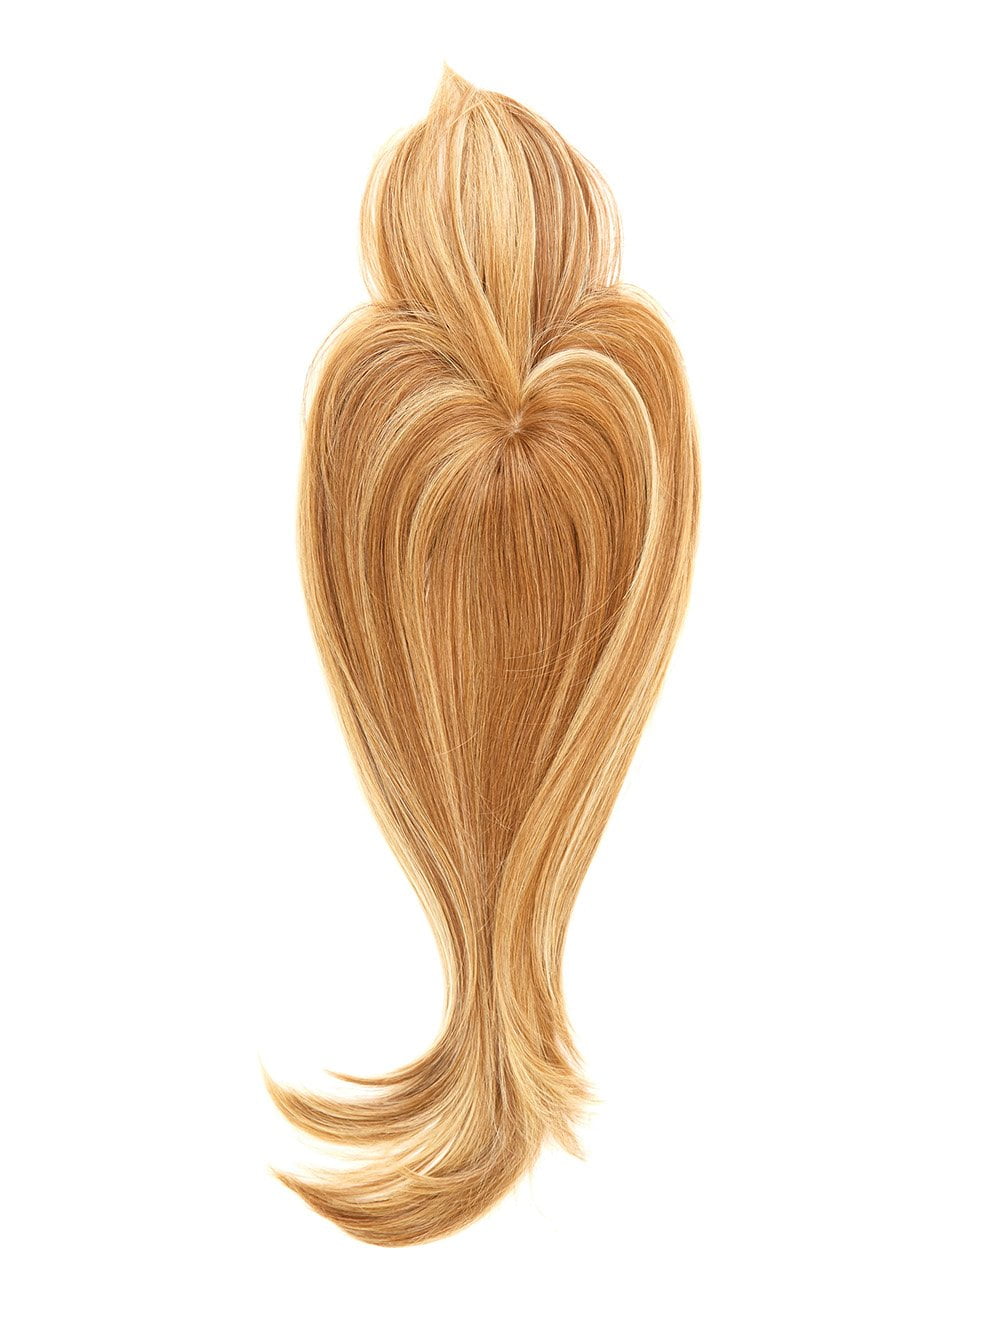 Hair Topper made with Tru2Life Heat-Friendly Synthetic Hair.